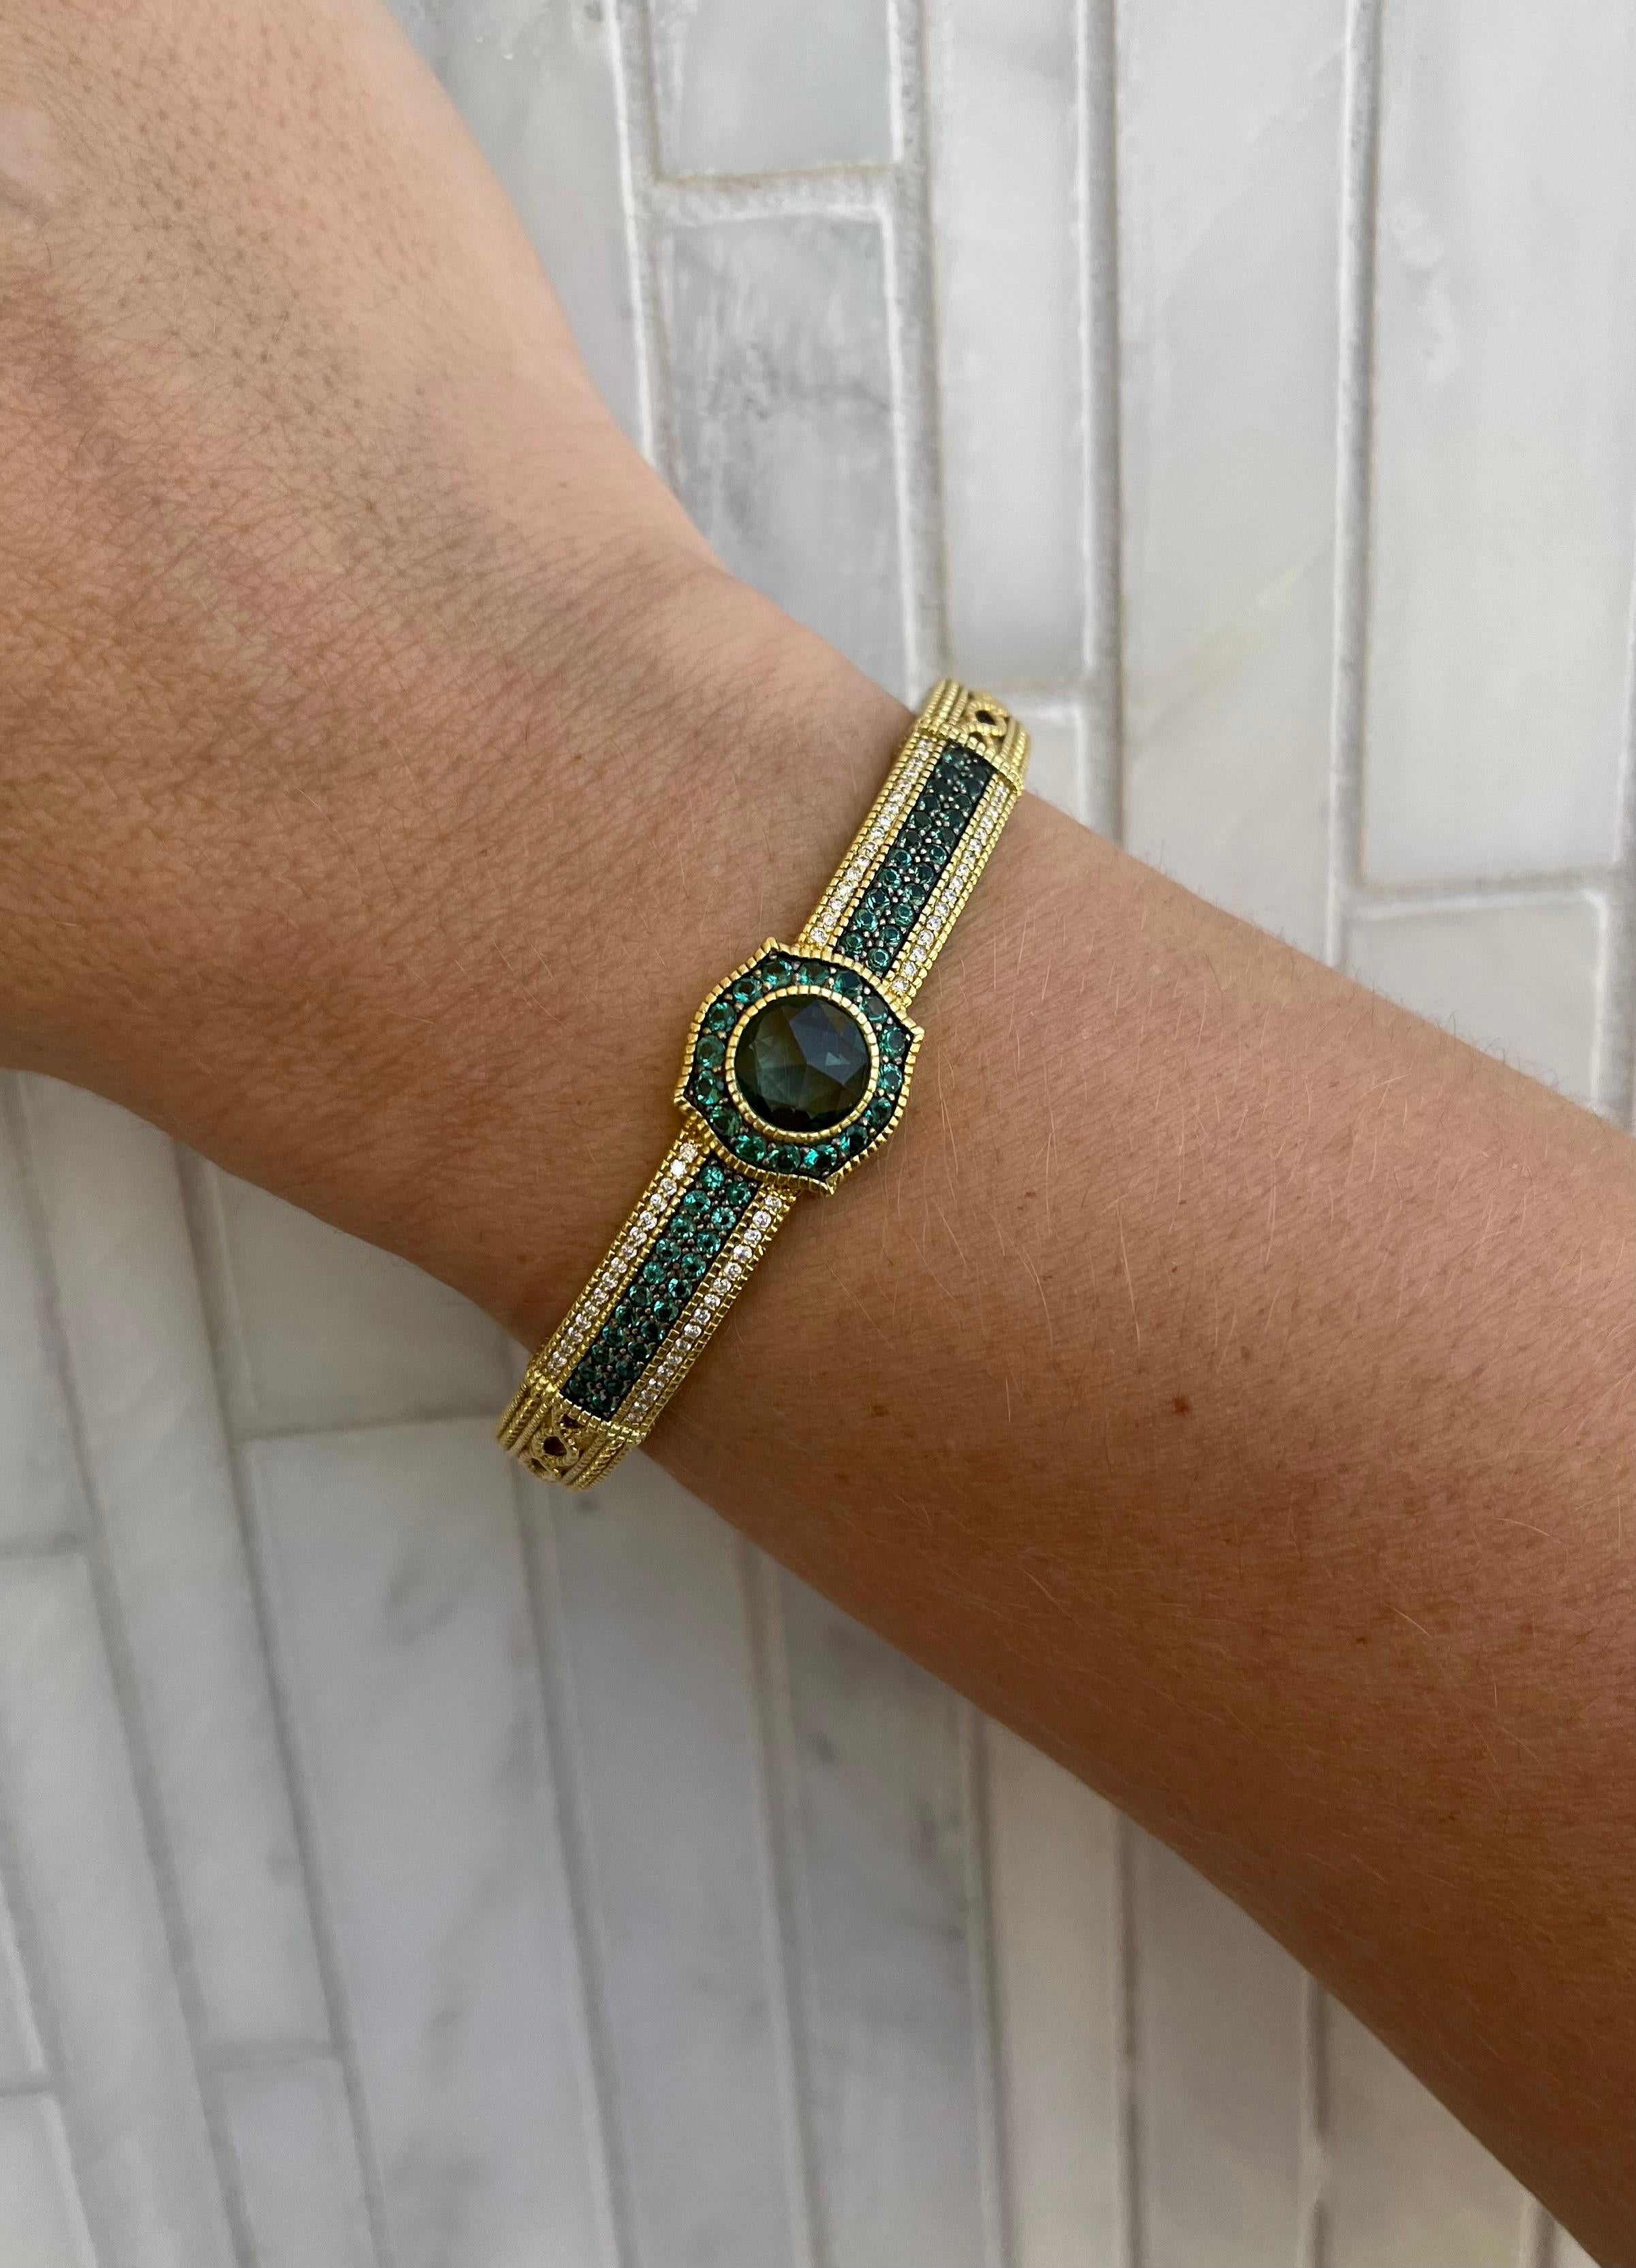 Elevate your style with the exquisite Judith Ripka Green Sapphire Bangle, a true masterpiece of elegance and luxury. Crafted in radiant 18K yellow gold, this bangle exudes timeless charm and sophistication. The star of the show is the stunning 3.5